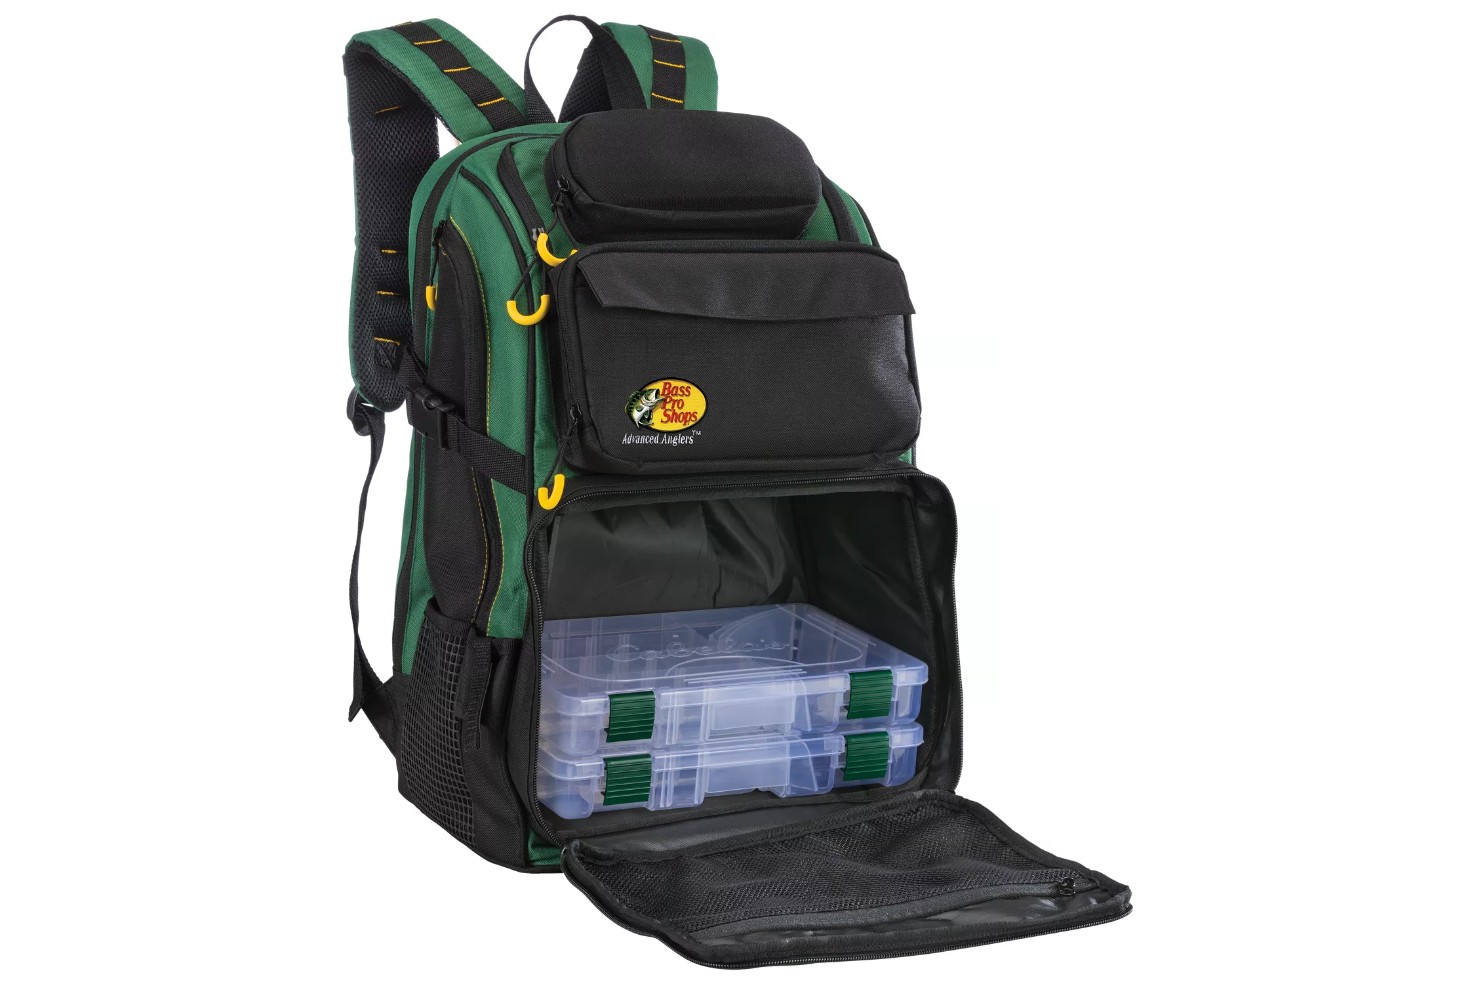 11 Great Fishing Backpacks for Every Kind of Angler - The Manual